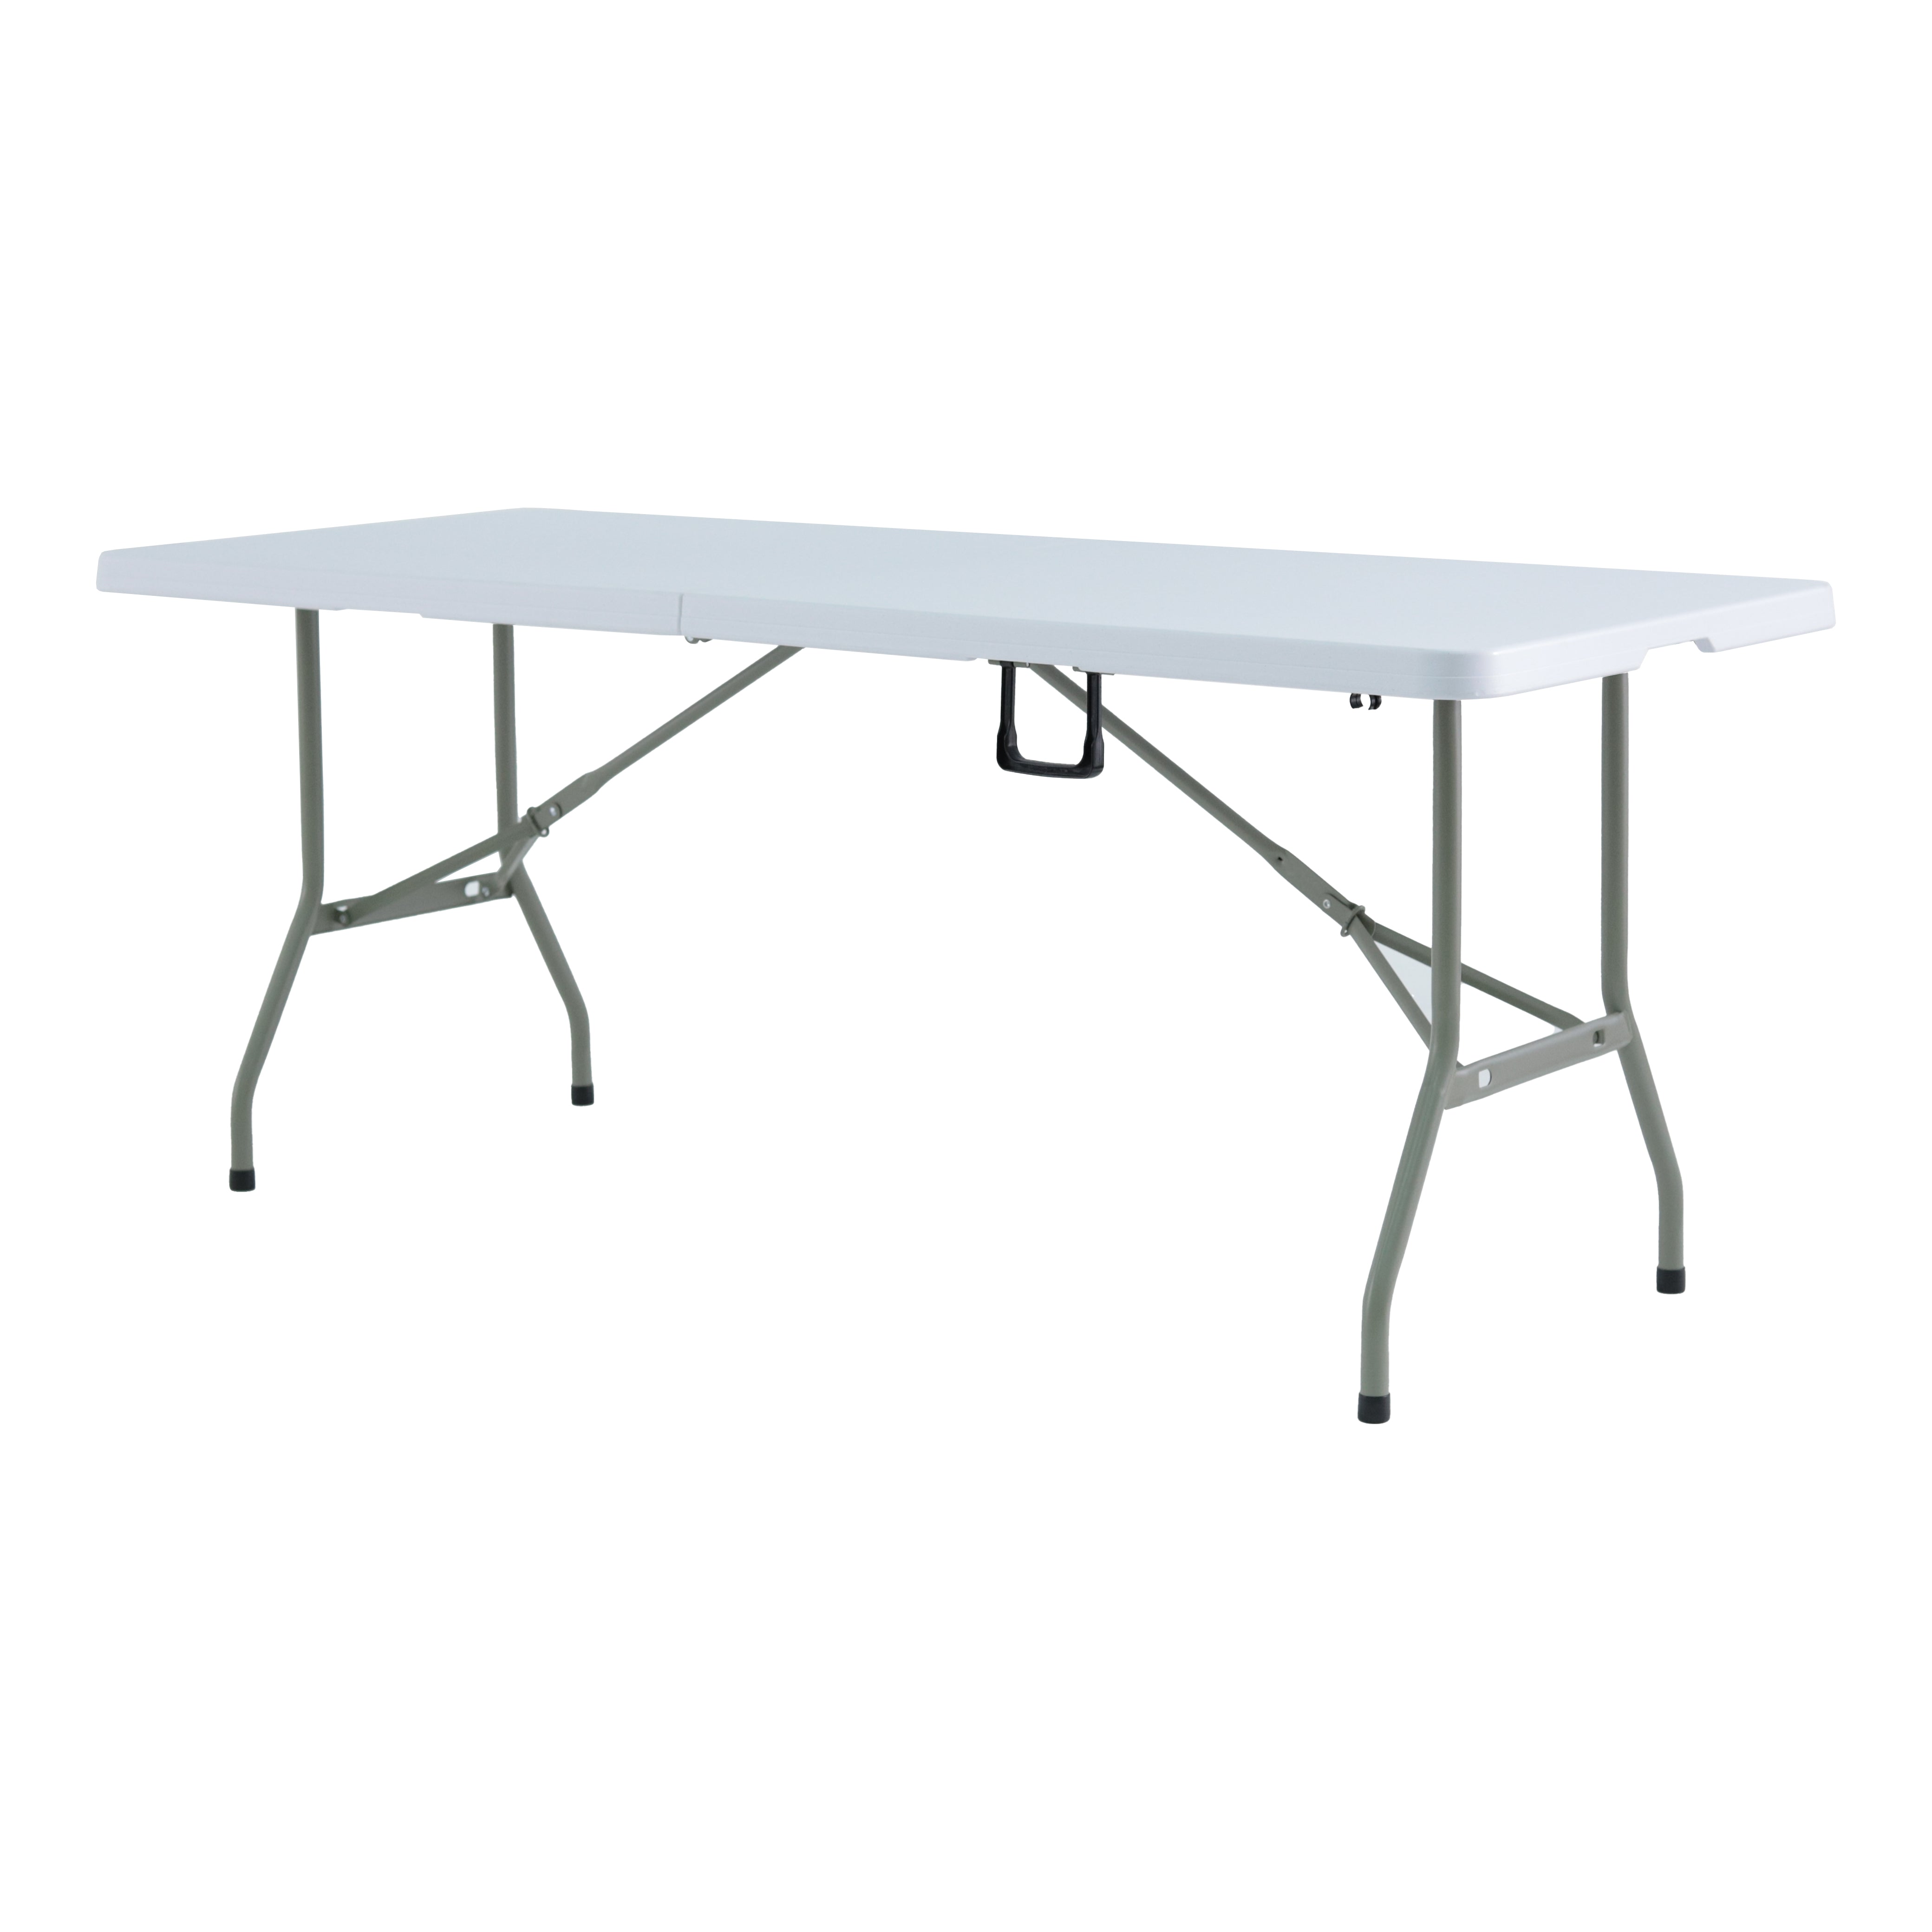 <b>Erie Rectangular HDPE Folding In Half Banquet Table With Metal Leg</b><br>5FT / 6FT